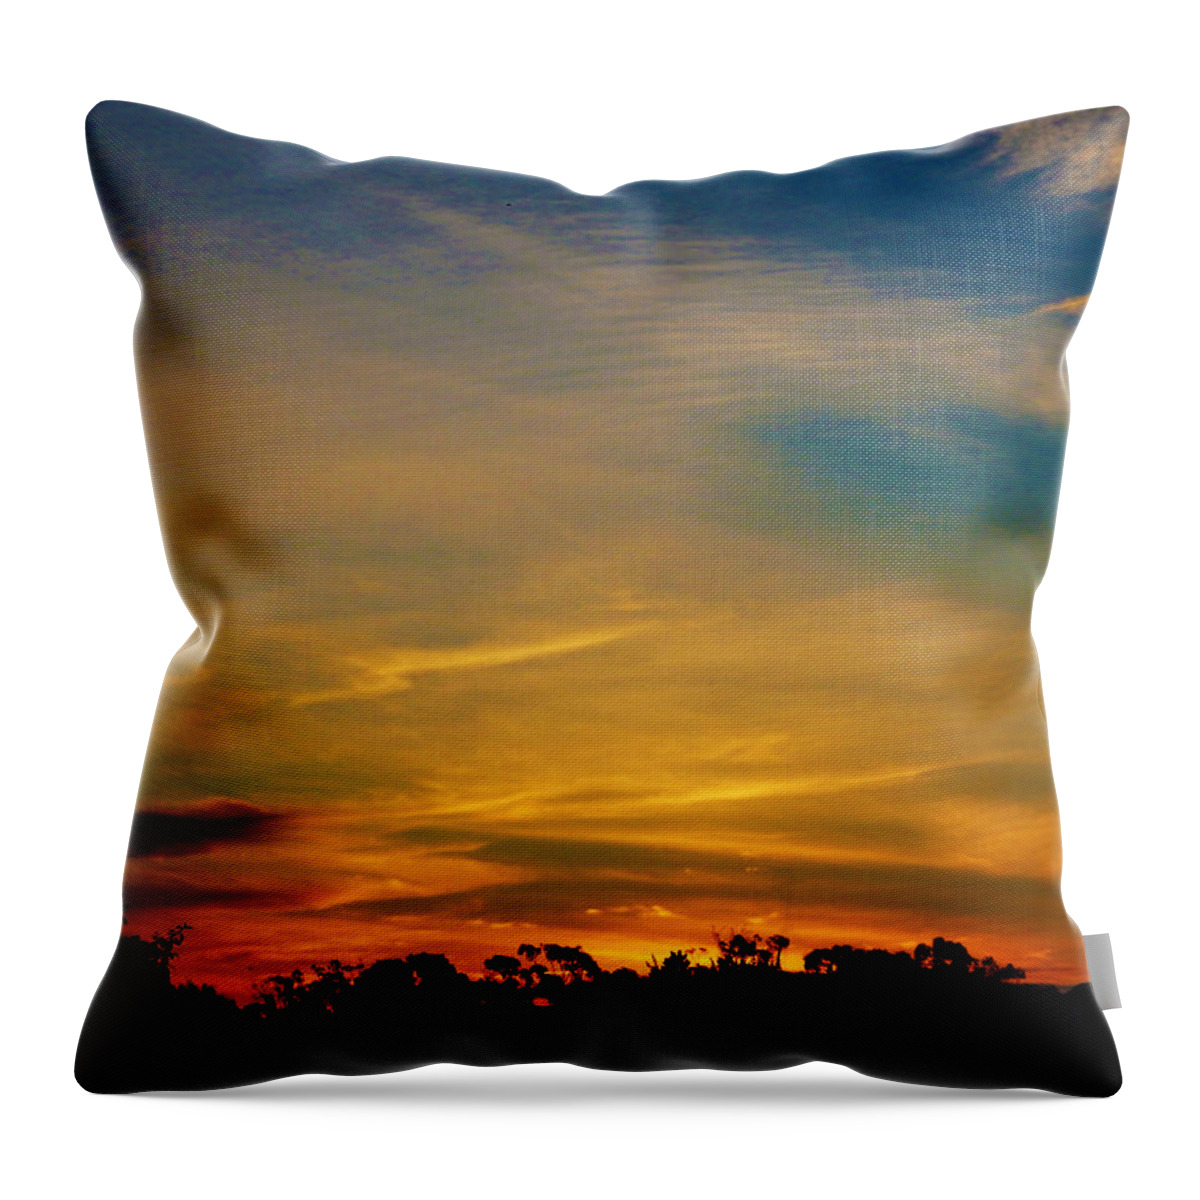 Sunset Throw Pillow featuring the photograph Gold Swords by Mark Blauhoefer